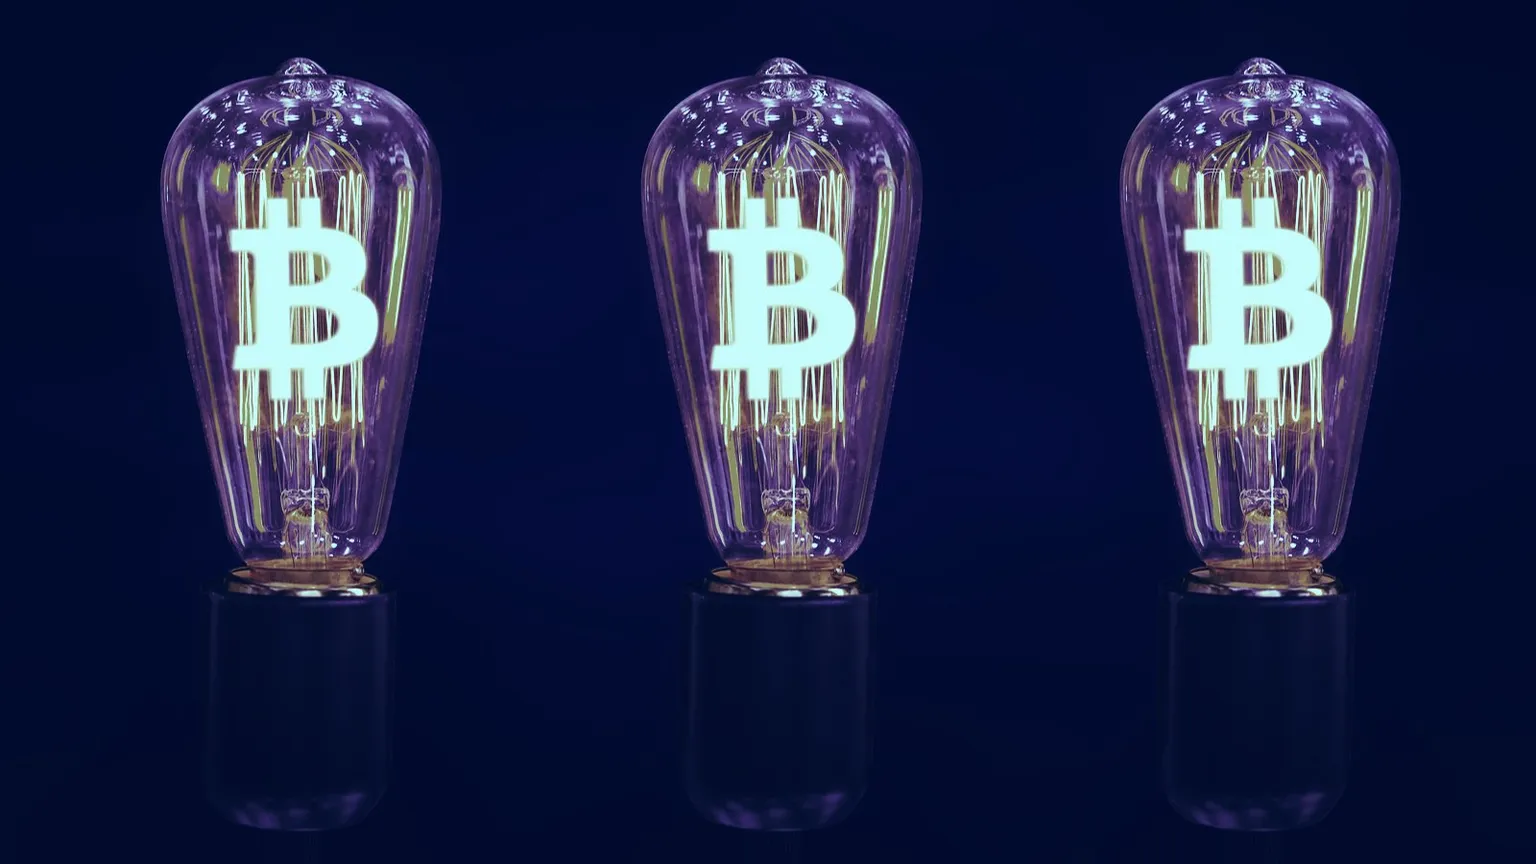 Bitcoin energy and its environmental impact is a dirty subject. Image: Shutterstock